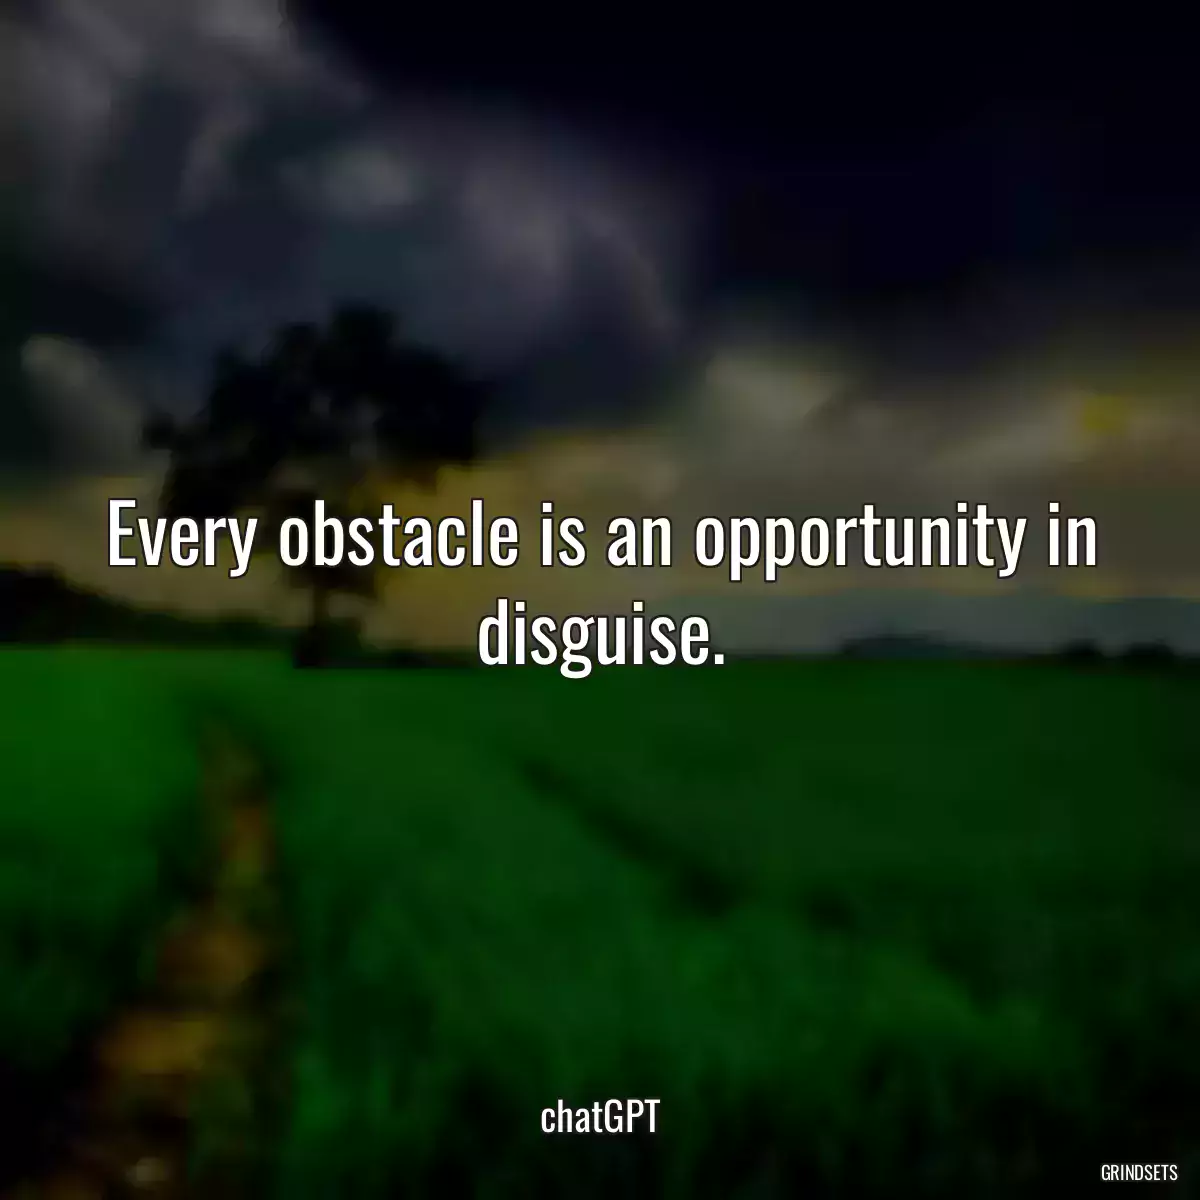 Every obstacle is an opportunity in disguise.